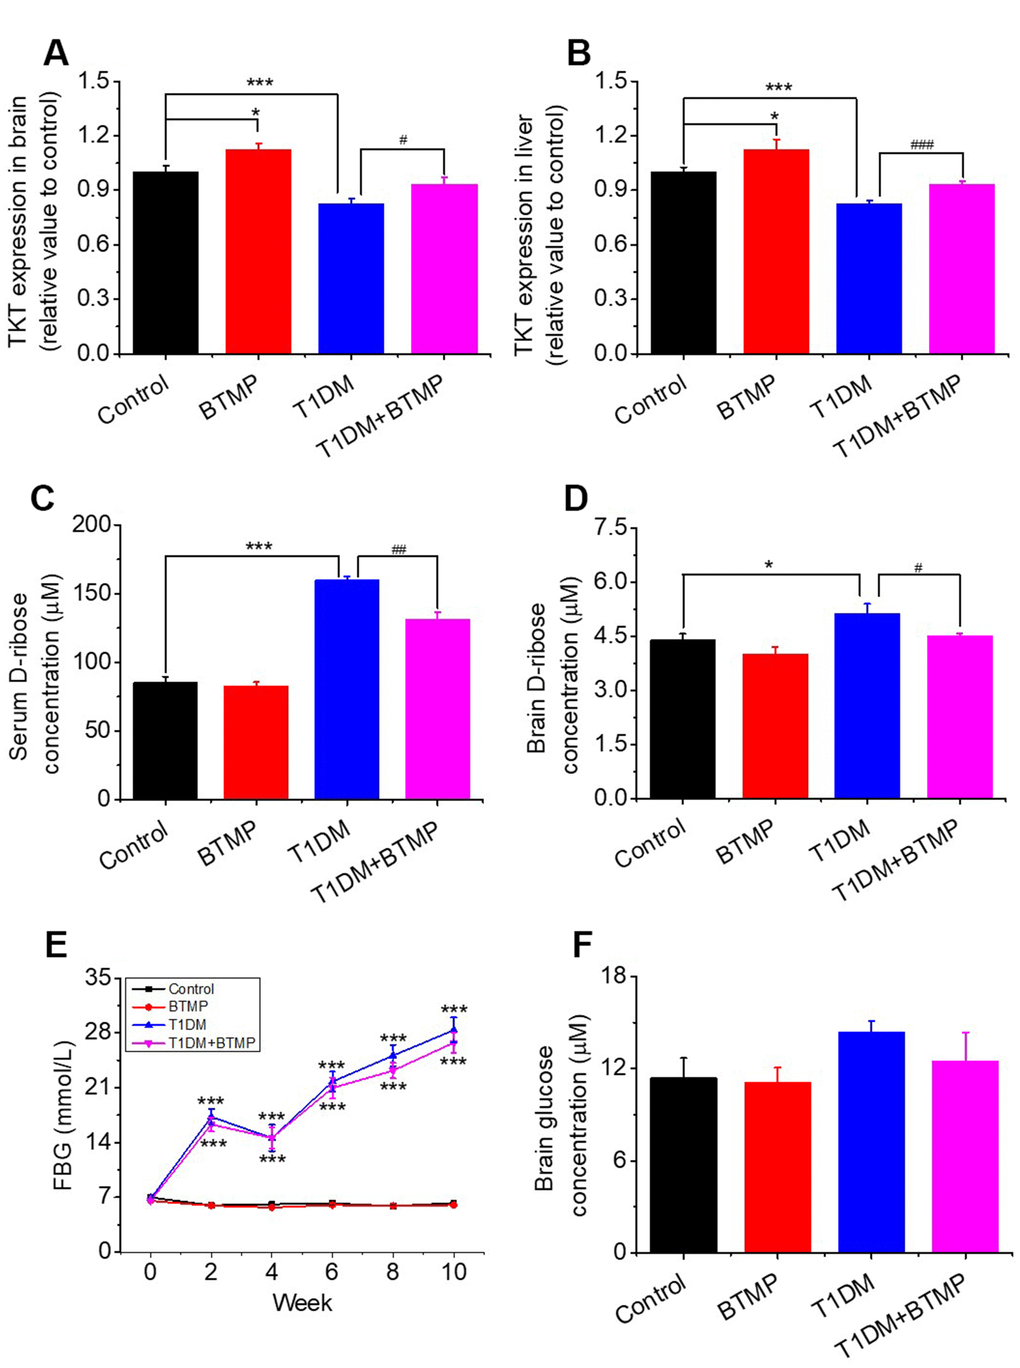 Effect of benfotiamine (BTMP) on the levels of D-ribose, D-glucose and TKT in T1DM rats. Conditions for the preparation of T1DM rats are shown in Figure 1. Male rats (6-8 weeks) were divided into four groups as follows: T1DM rats were gavaged with benfotiamine (BTMP, 300 mg/kg bw, once daily) dissolved in carboxymethylcellulose (CMC) (90) (T1DM+BTMP, n=20); T1DM rats were gavaged with CMC (T1DM, n=20); normal SD rats were gavaged with CMC (Control, n=10) and BTMP (n=10) as negative and positive controls, respectively. The expression levels of transketolase (TKT) in the brain (panel A) and liver (panel B) were measured with ELISA kits. After 10 weeks of domestication, D-ribose levels in the serum (panel C) and brain (panel D) of rats were measured, and D-glucose levels were measured in the brain (panel F). Fasting blood glucose (FBG) was measured every other week (panel E). “*” compared to the control group. “#” represents the difference between the T1DM and T1DM+BTMP groups. All values are expressed as the mean ± S.E.M. *, P P P P P 